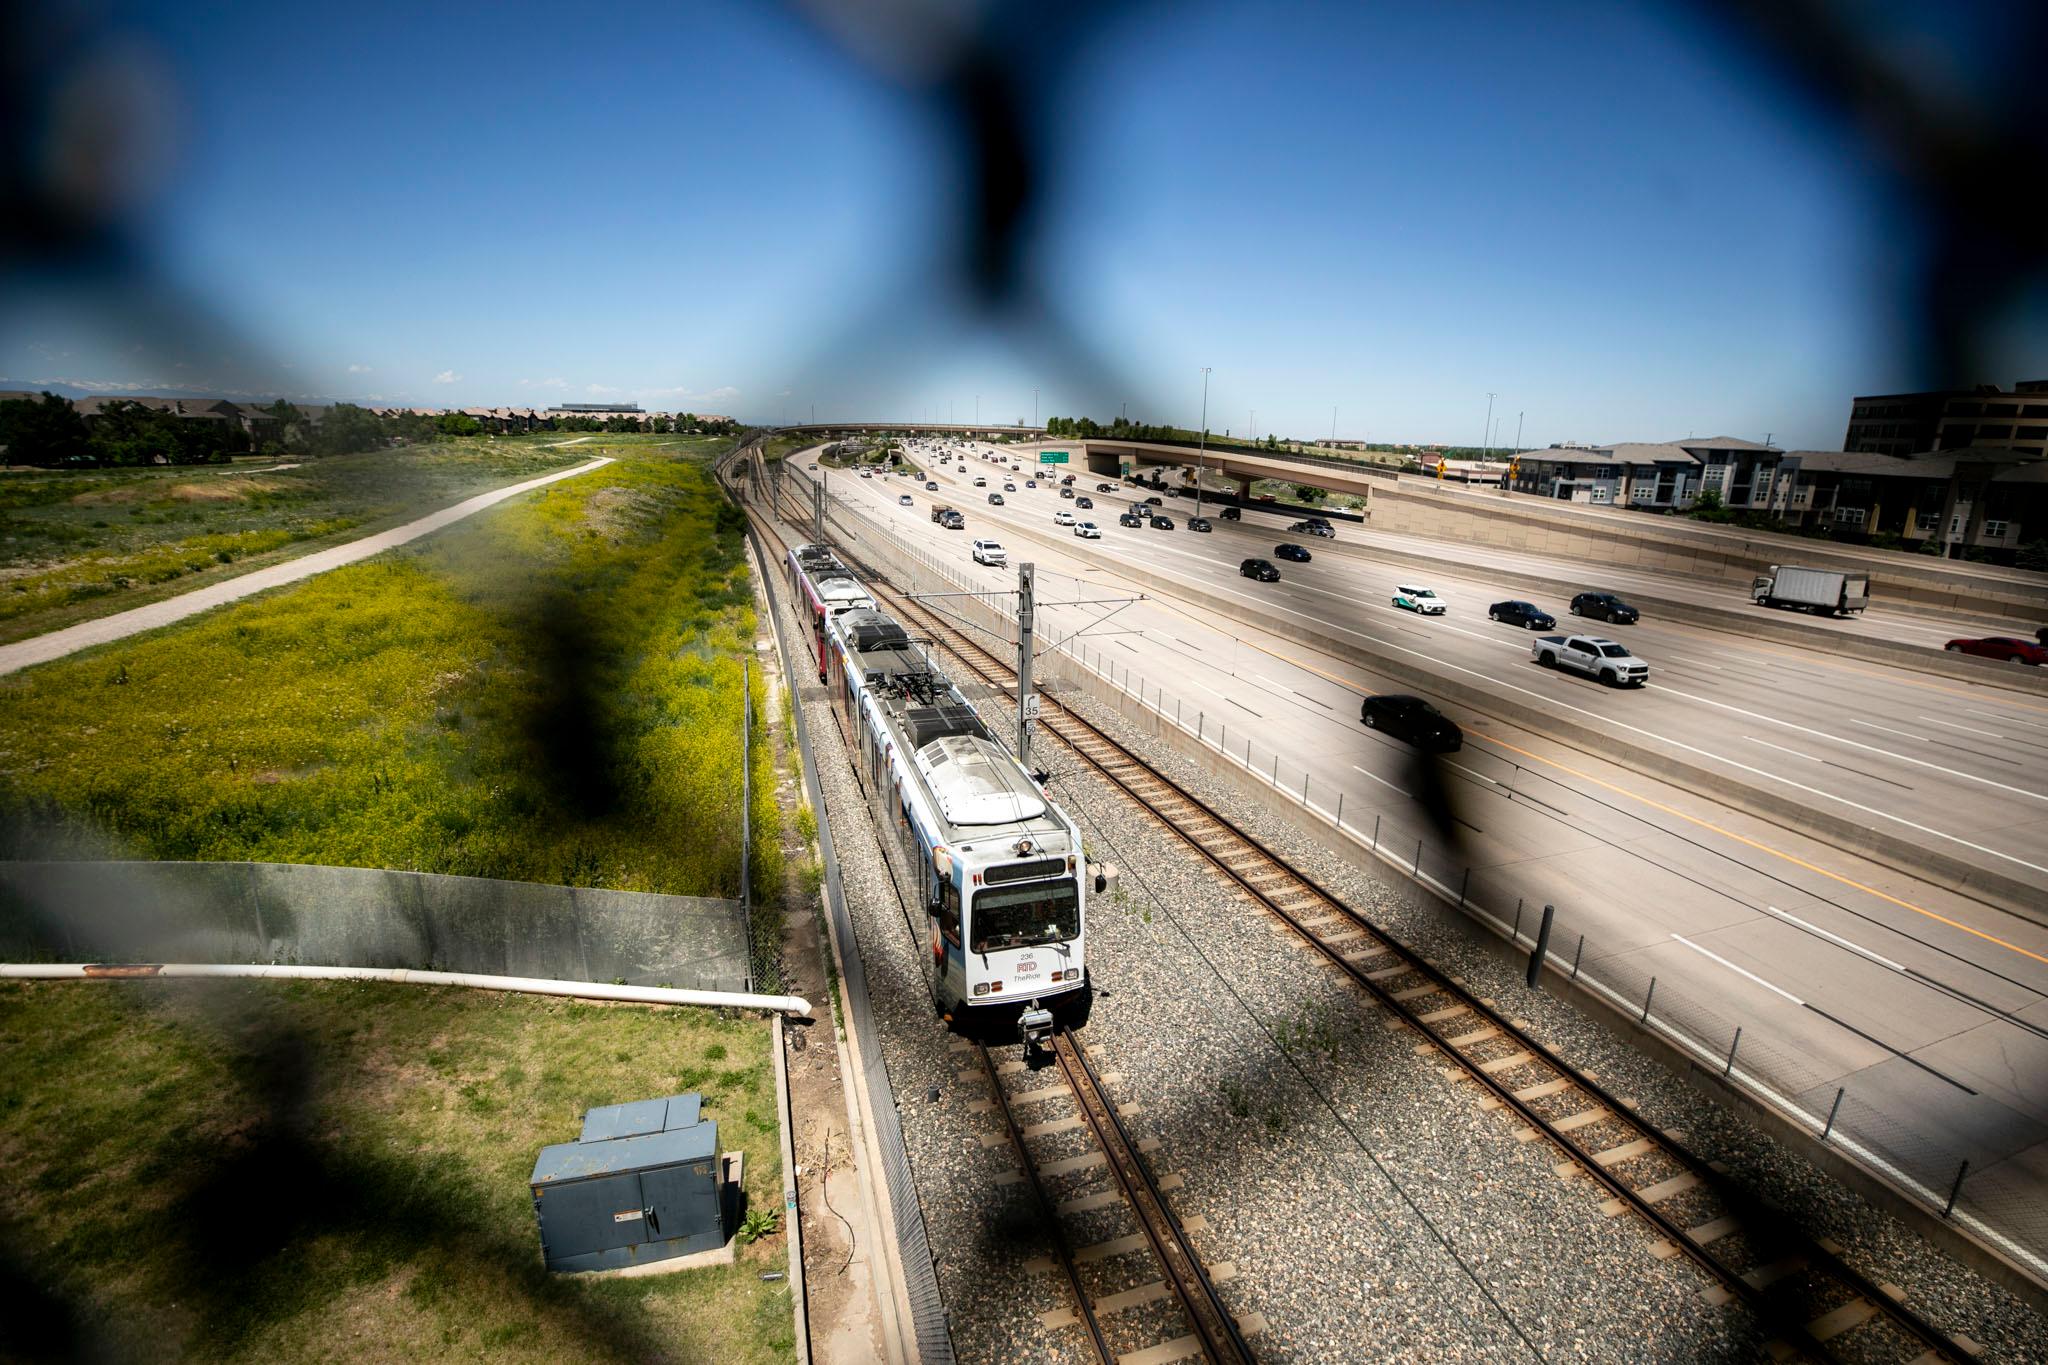 View of an RTD train through a chain link fence that runs parallel to I-25.